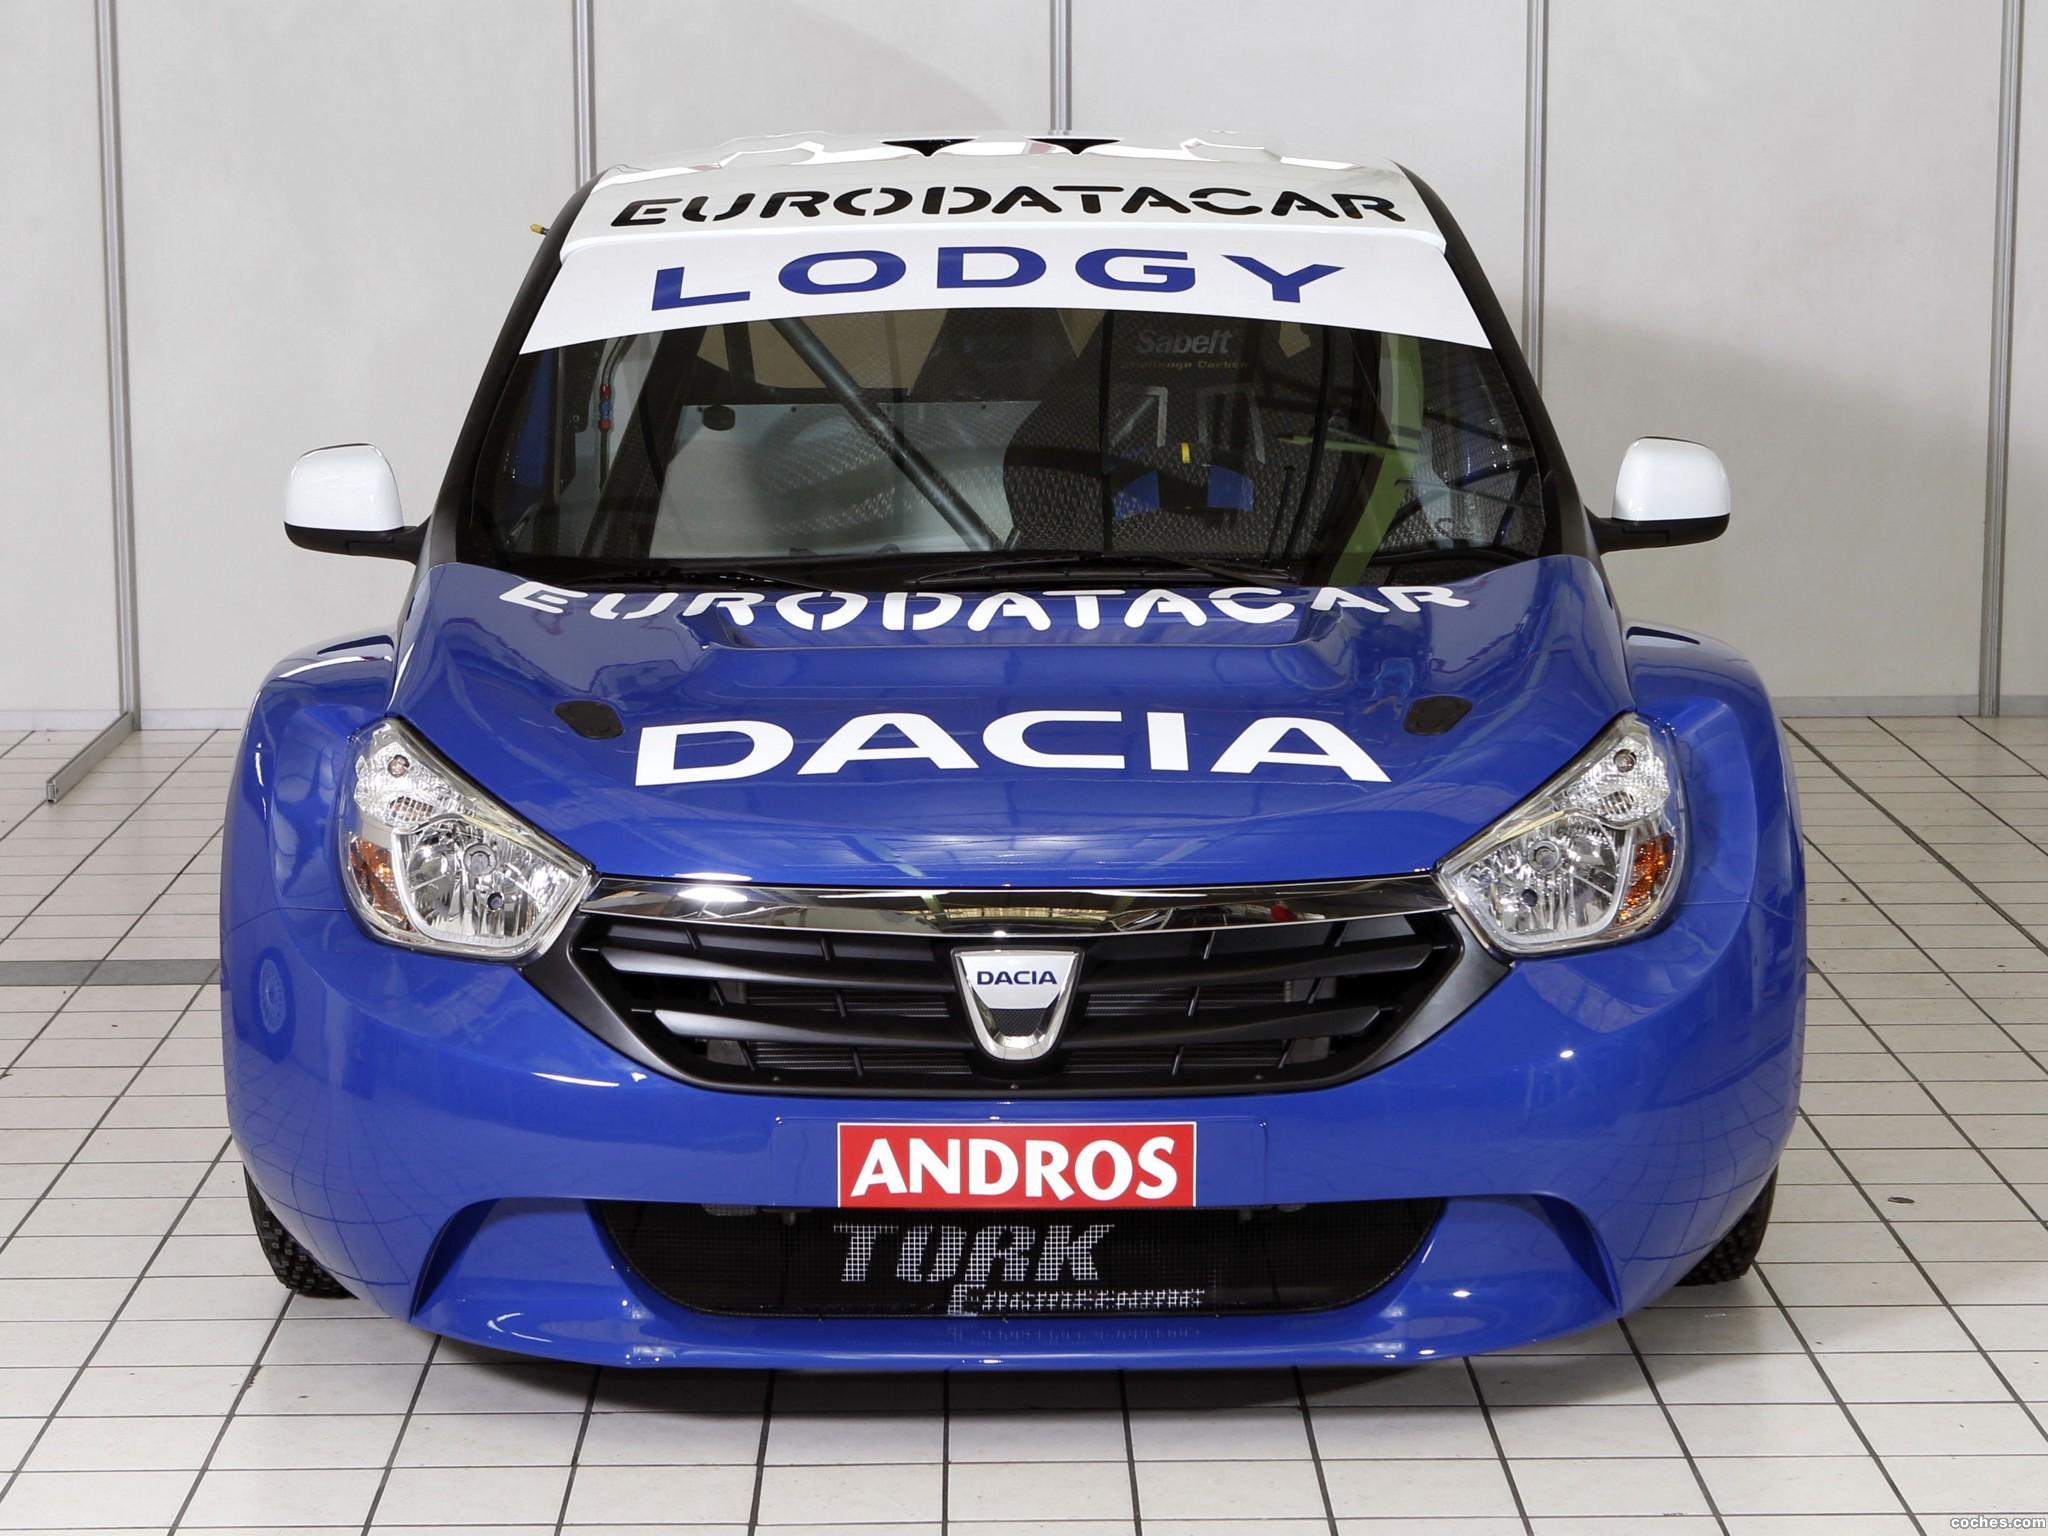 dacia_lodgy-glace-trophee-andros-2011_r4